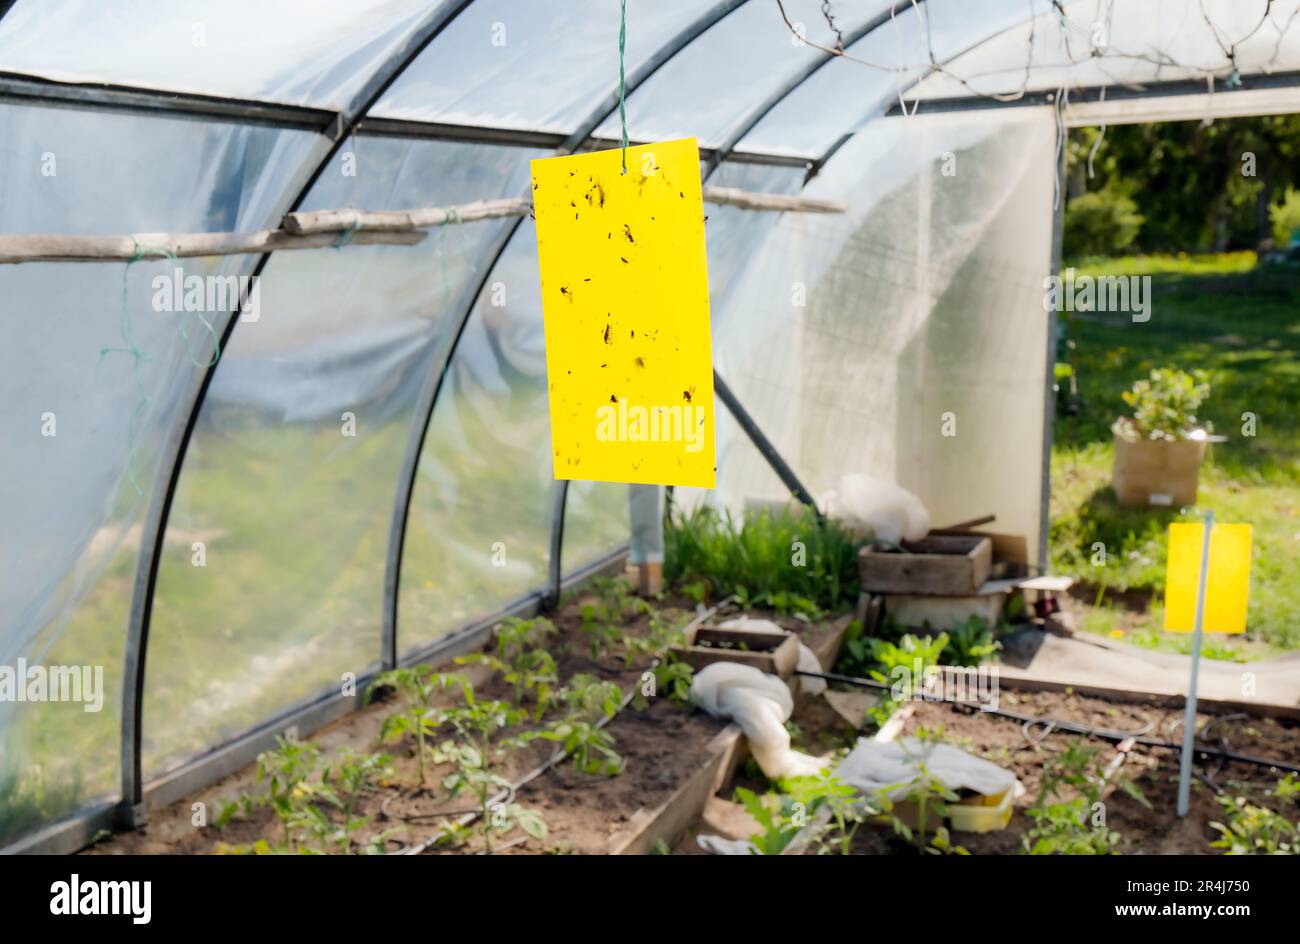 Sticky Traps for Indoor & Greenhouse Insect Monitoring